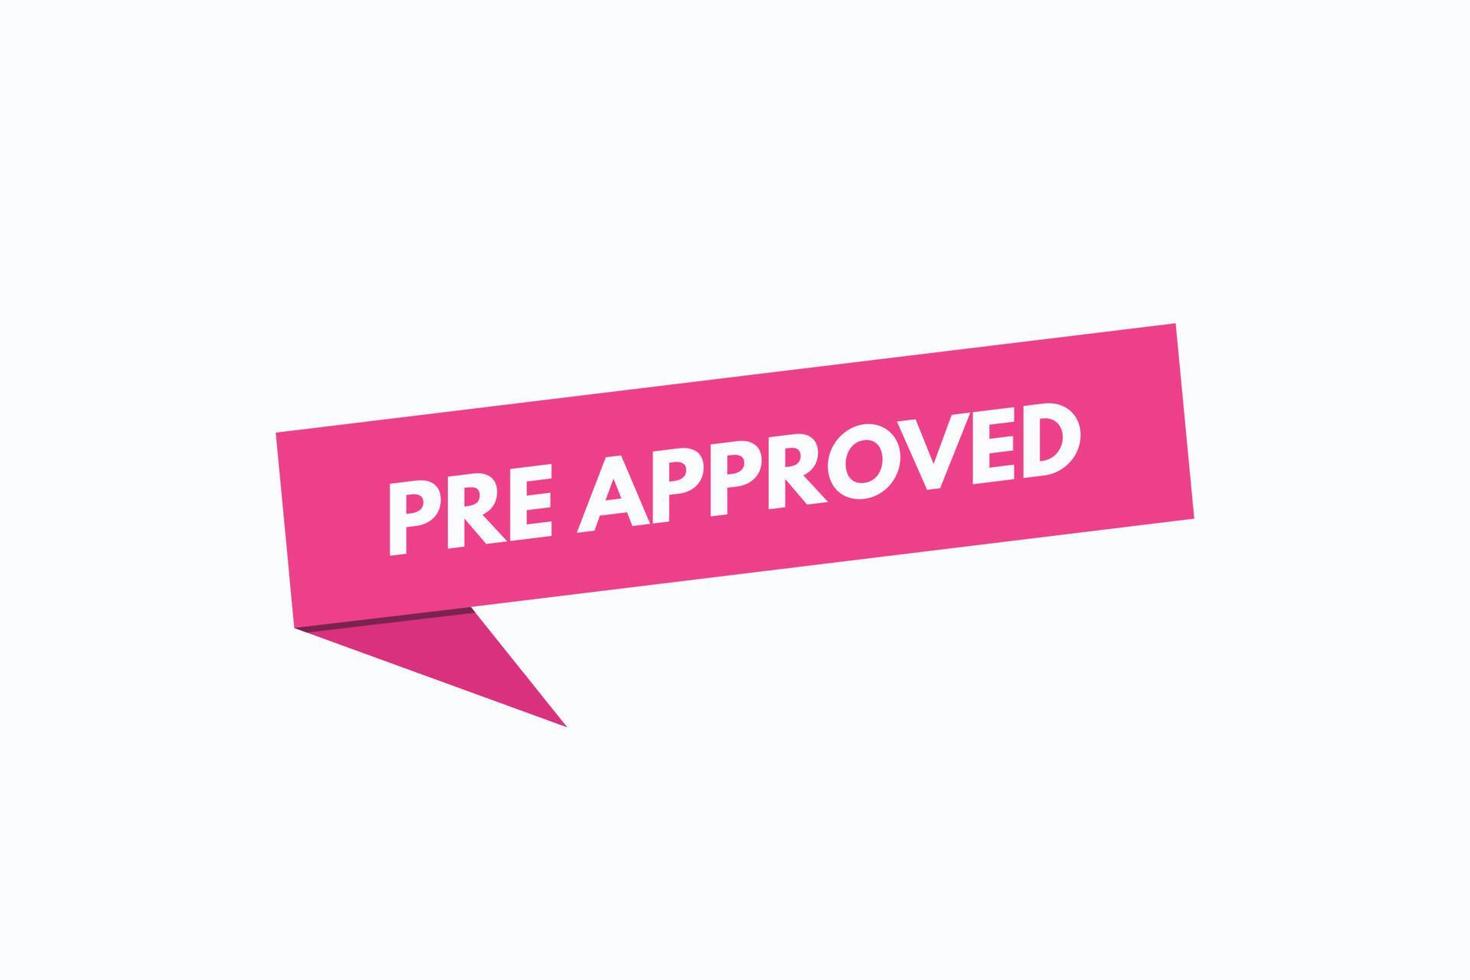 Basic RGBpre approved button vectors.sign label speech bubble pre approved vector